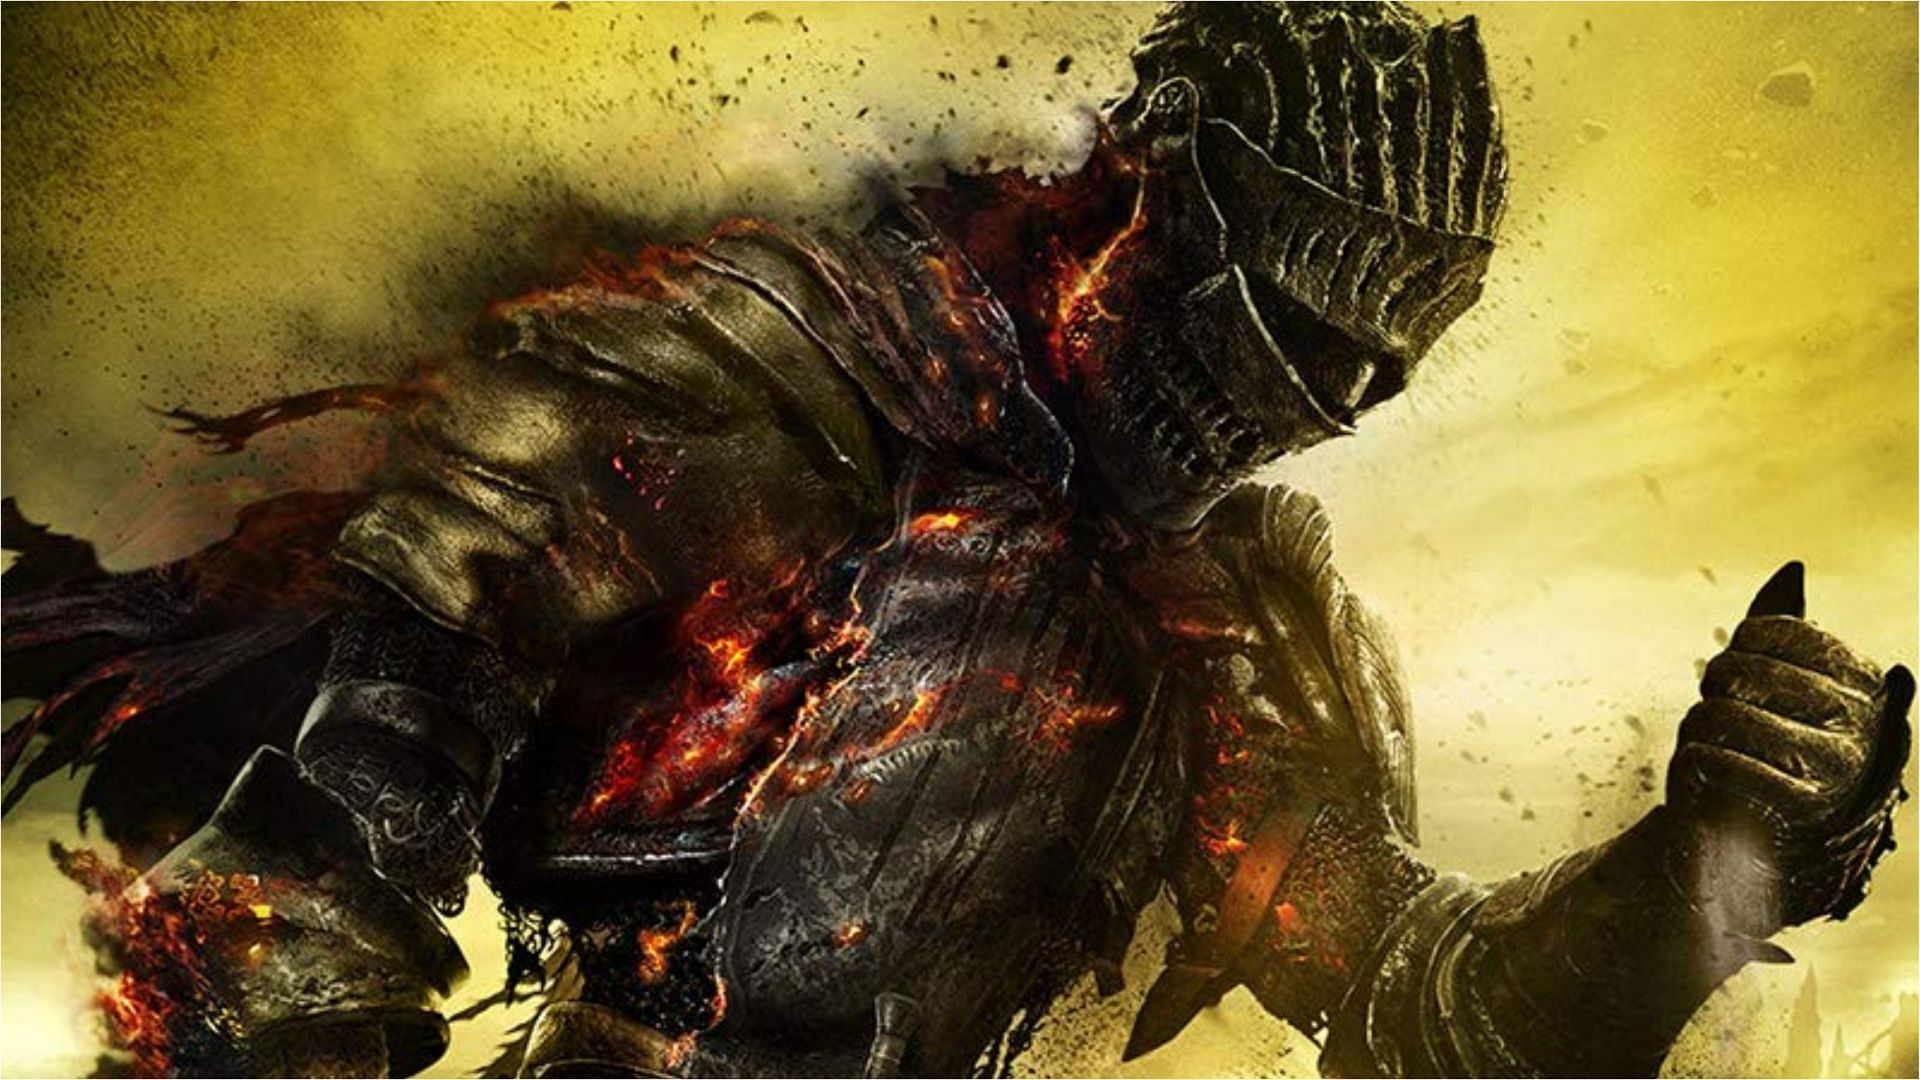 Dark Souls 3 got ported on PC in 2016 (Image via FromSoftware)